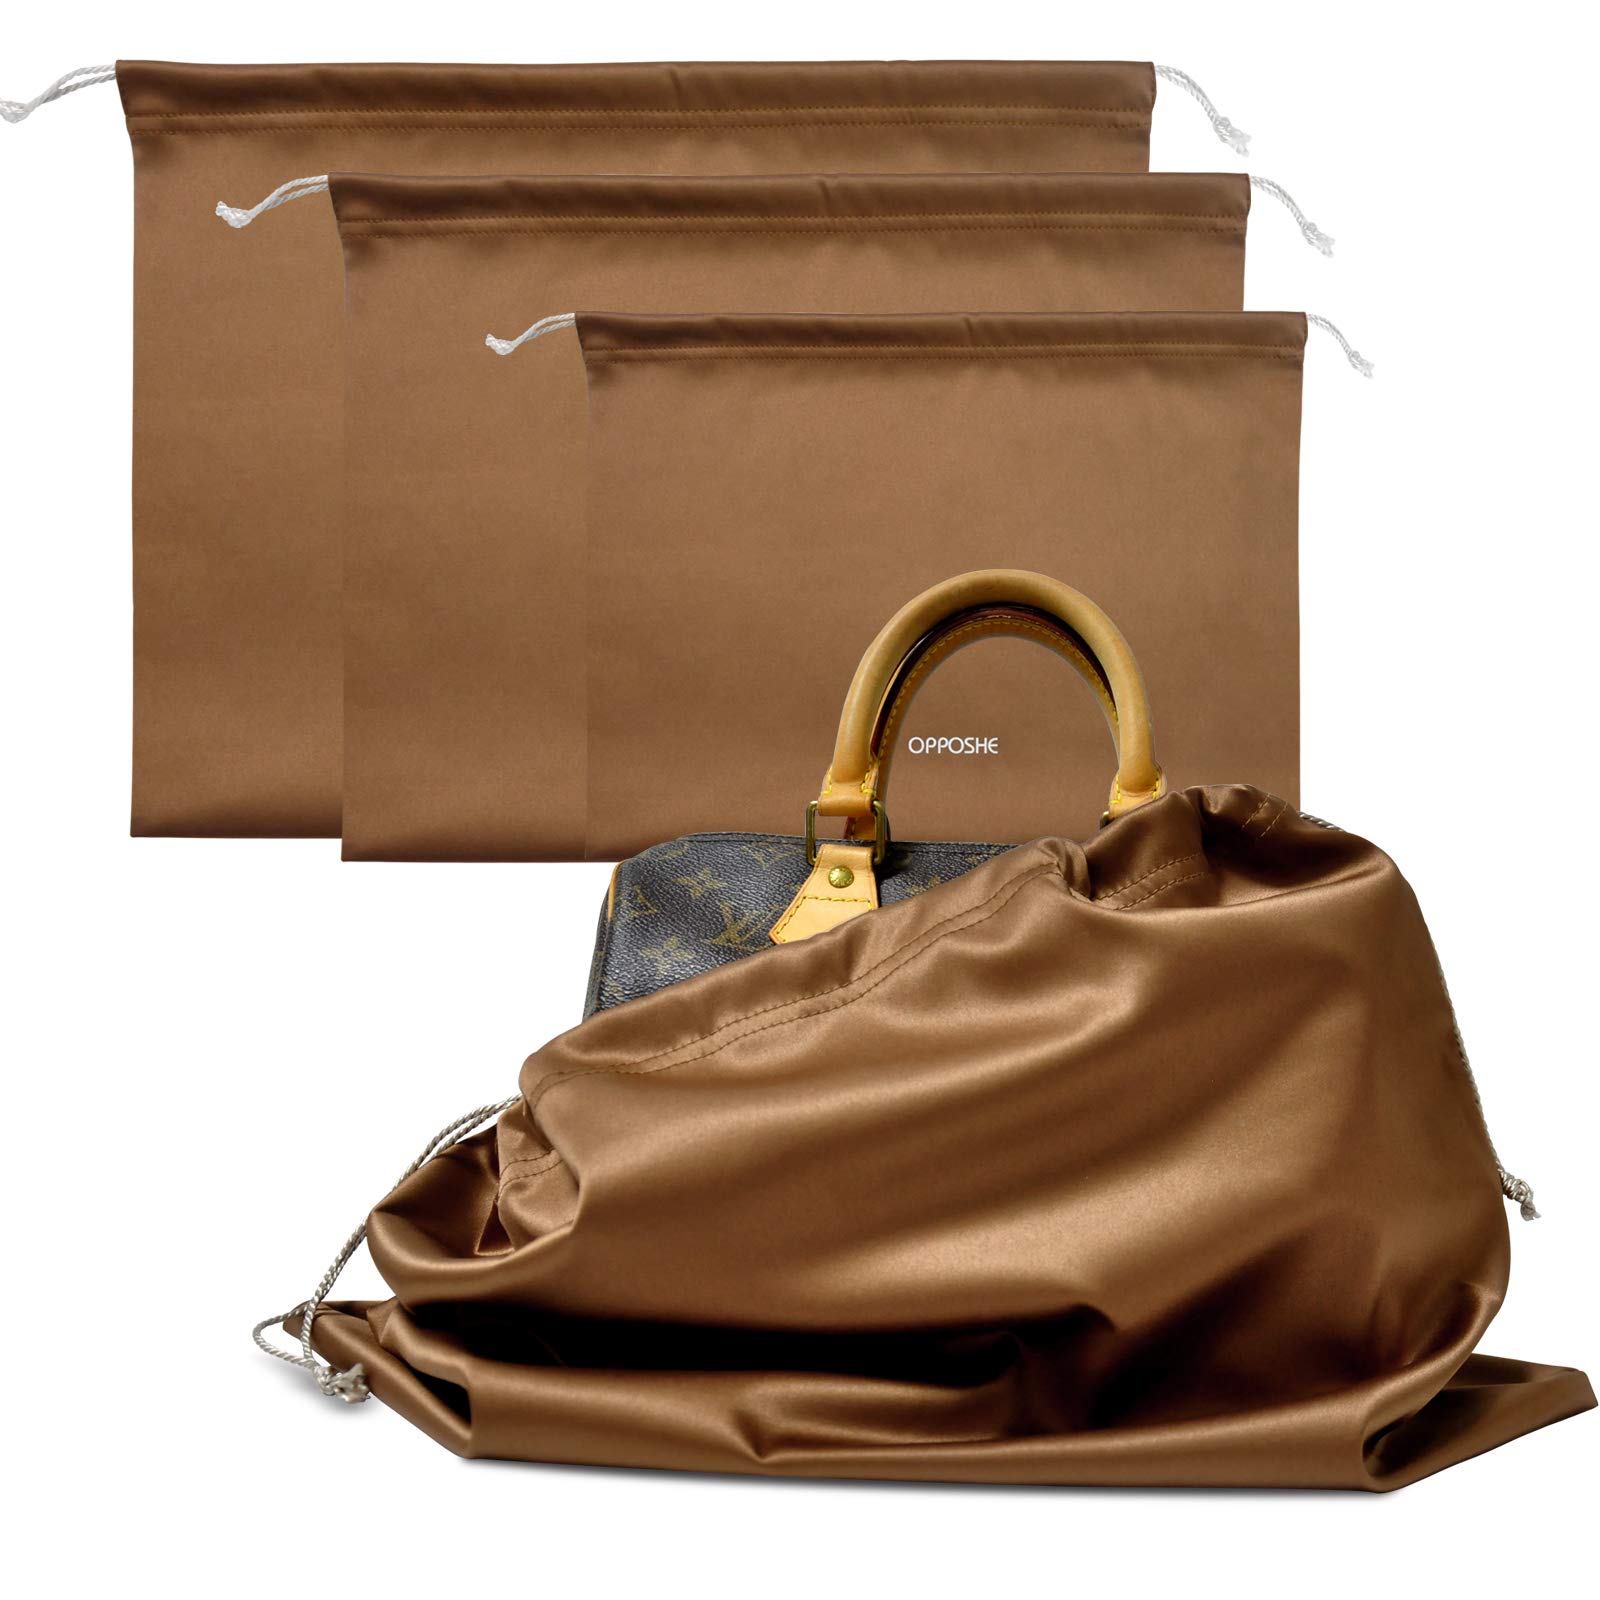 Satin Pillow Luxury Bag Shaper For Louis Vuitton Speedy 25/30/35/40  (Chocolate Brown) - More colors available